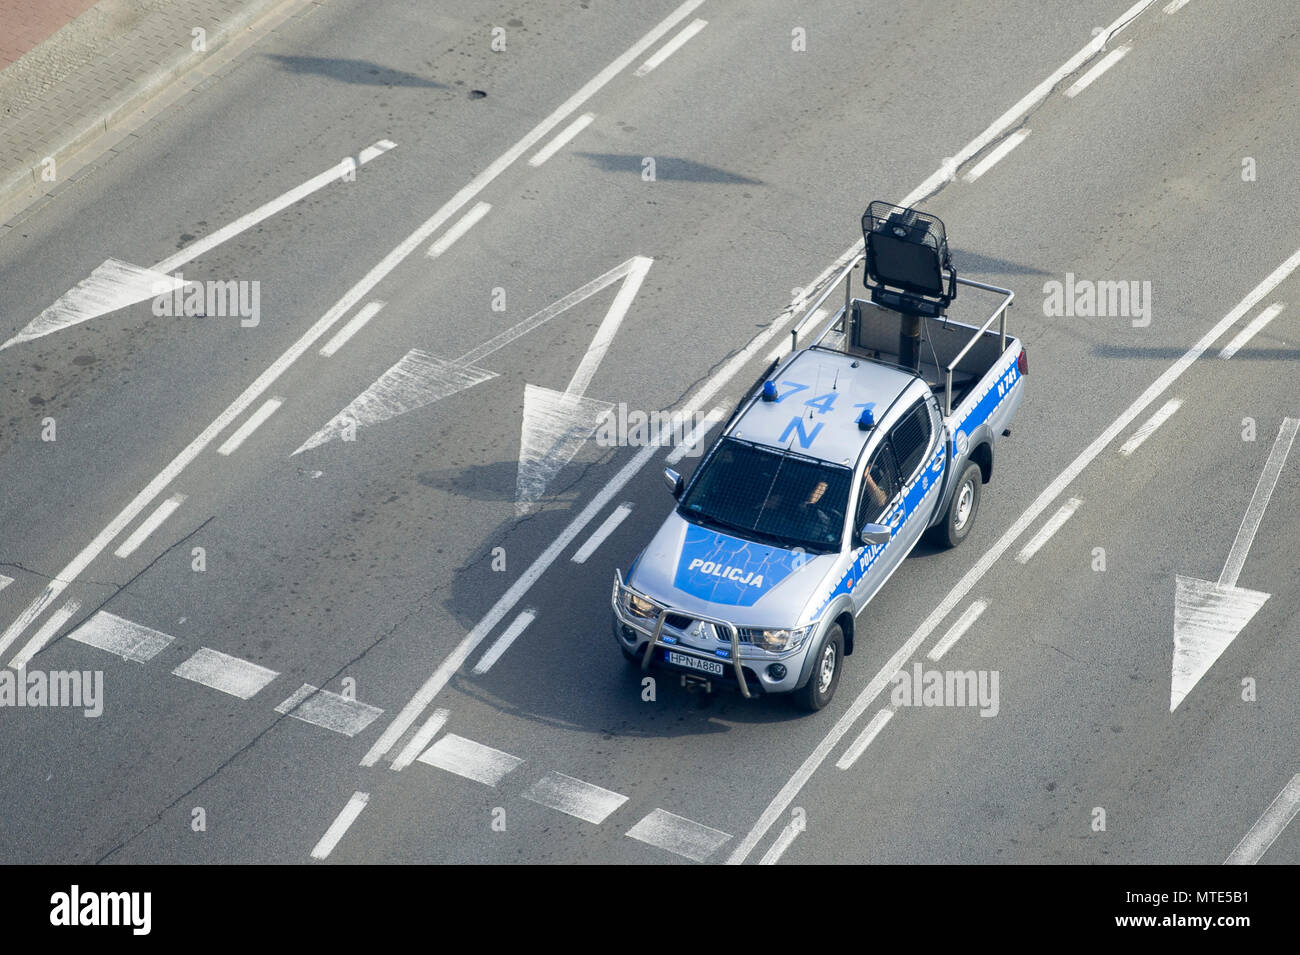 Polish police car Mitsubishi L200 with LRAD 500X (Long Range Acoustic Device is an acoustic hailing device used for non-lethal, non-kinetic crowd cont Stock Photo